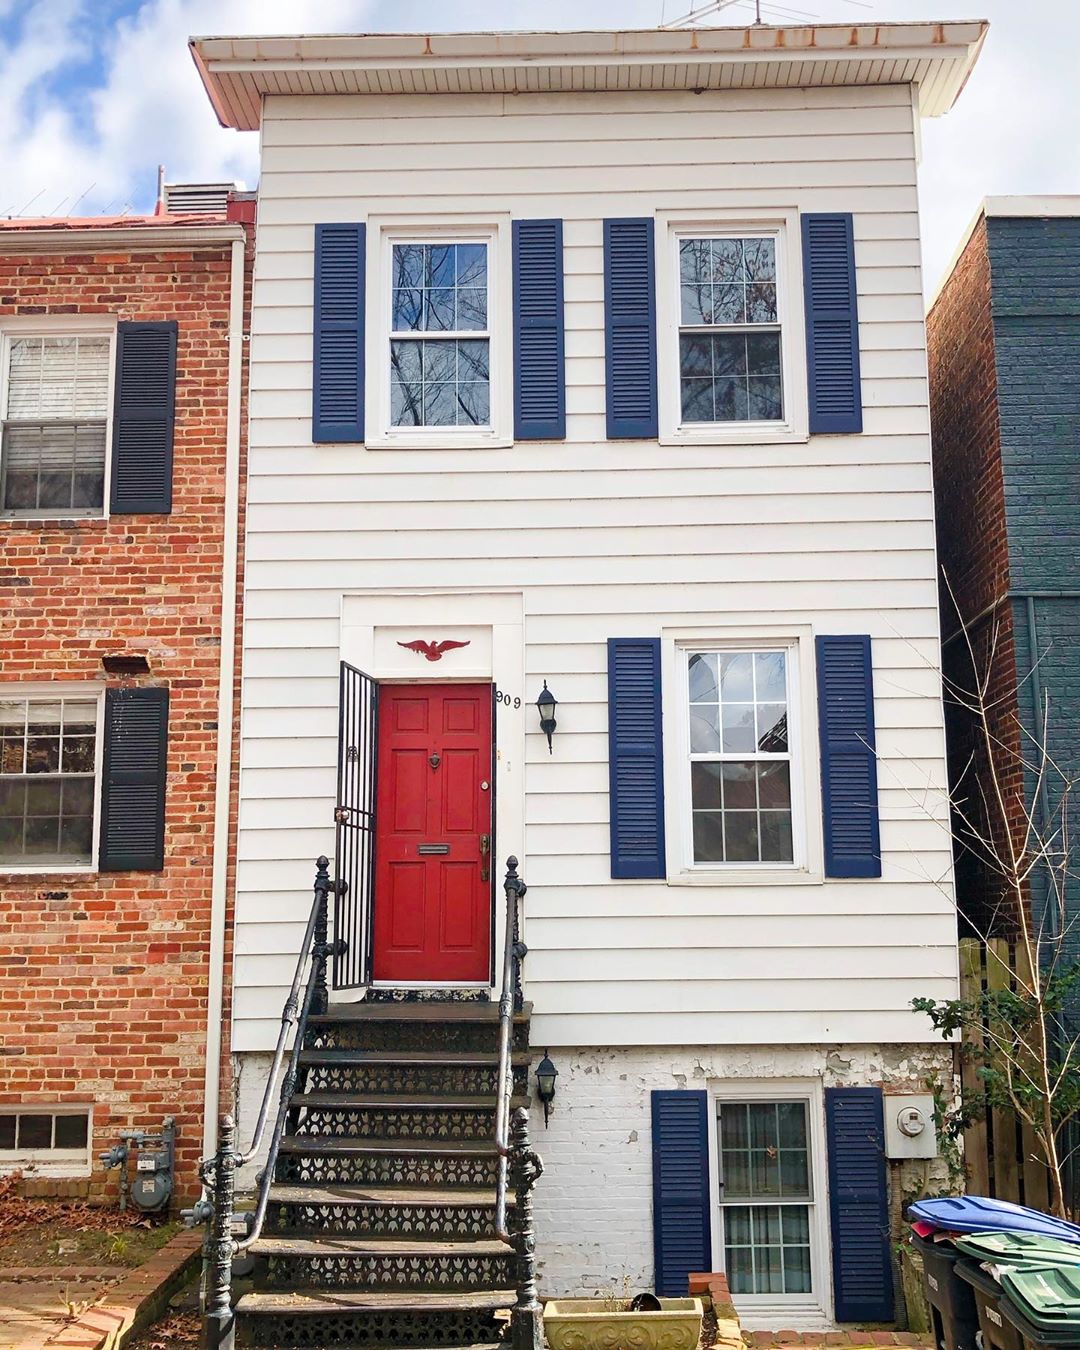 white Federal Style townhows with blue shutters and red door in Foggy Bottom, Washington, DC photo by Instagram user @penny.mause